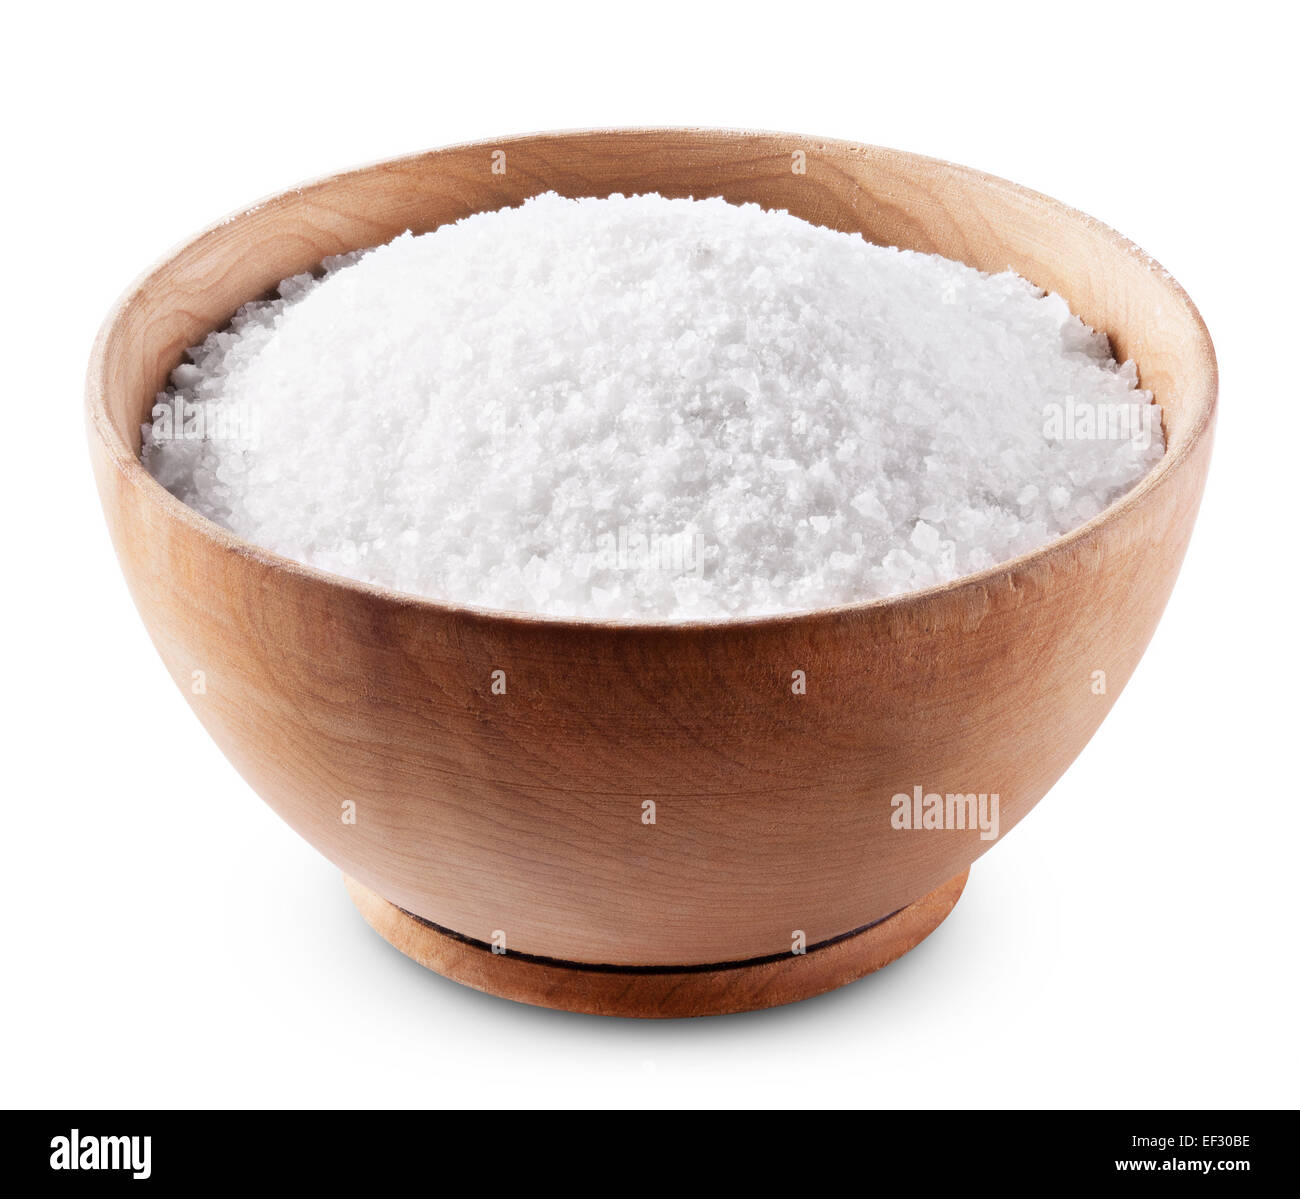 Sea salt in wooden bowl on white background with clipping path Stock Photo